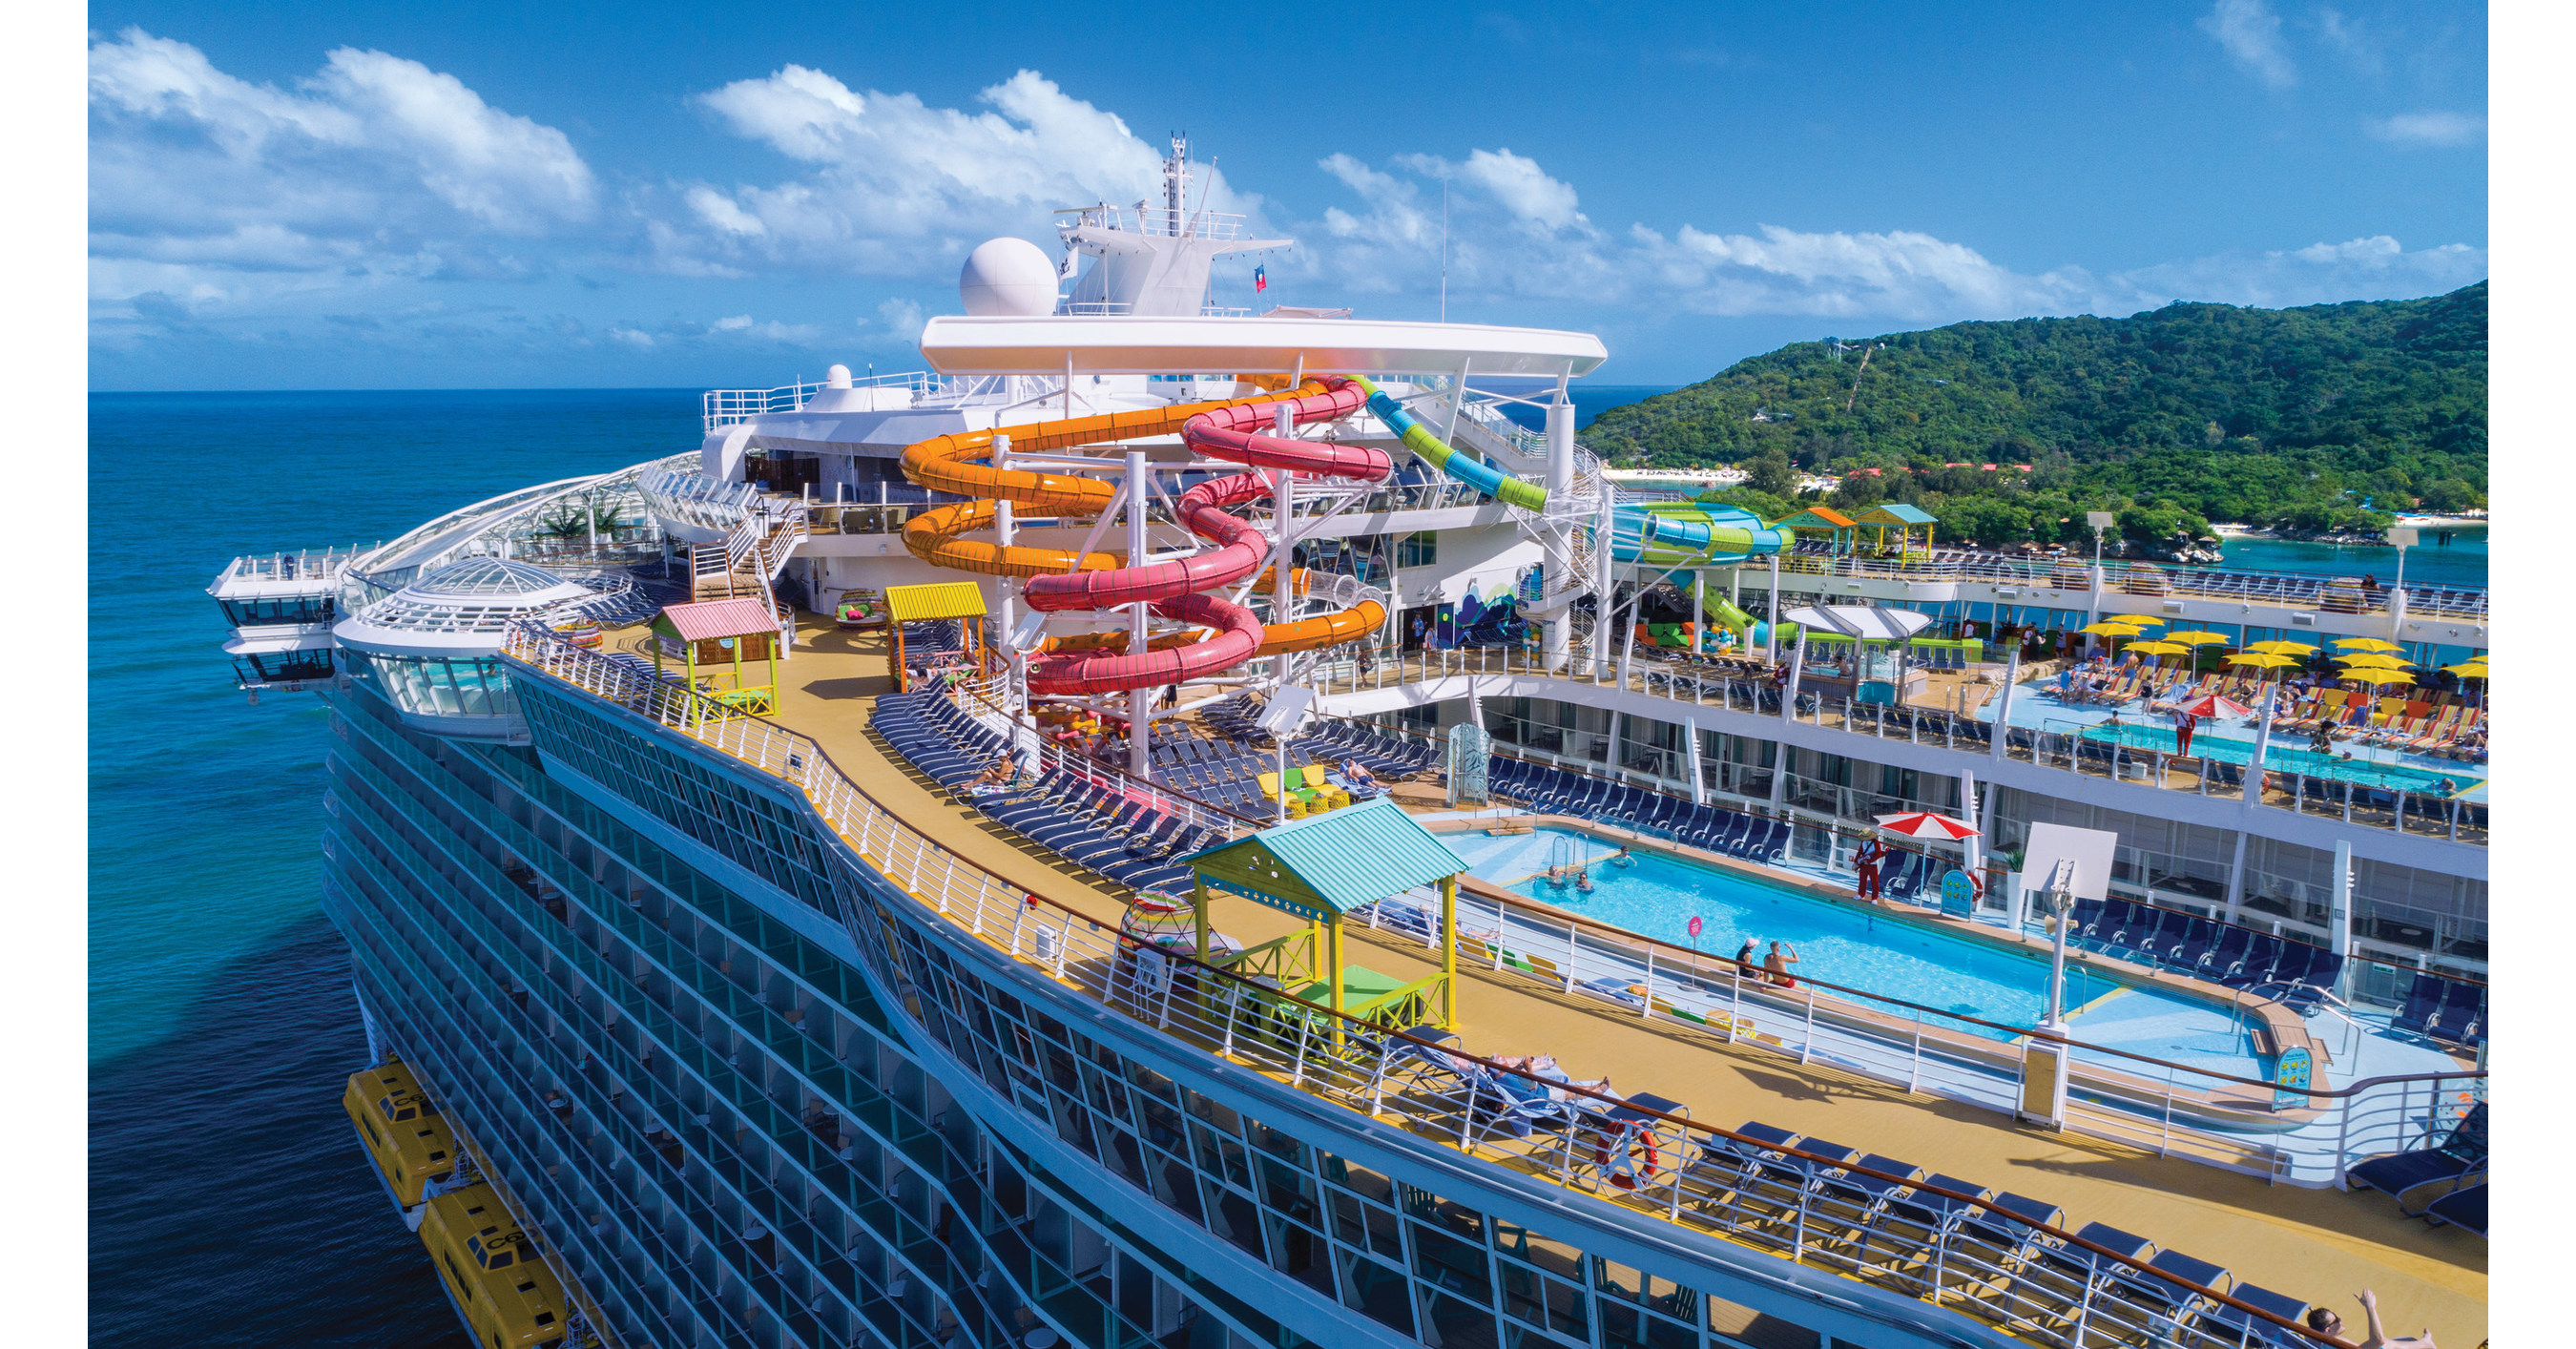 Liberty Of The Seas Entertainment Schedule 2022 Royal Caribbean Releases Schedule For Remaining Ships Returning To Sailing